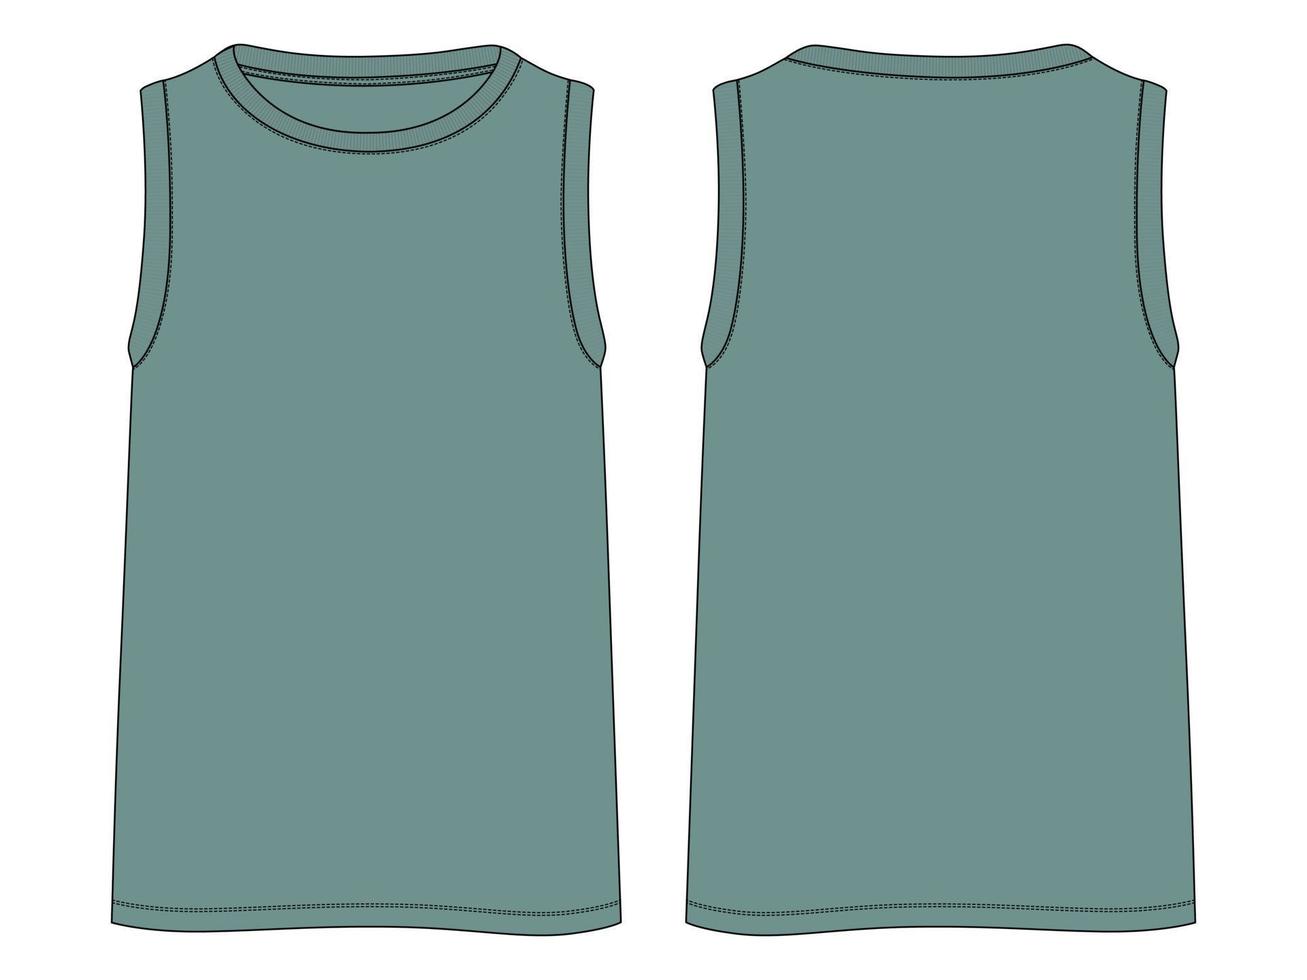 Tank Tops Technical Fashion flat sketch vector illustration Green Color template Front and back views. Apparel tank tops mock up for men's and boys.